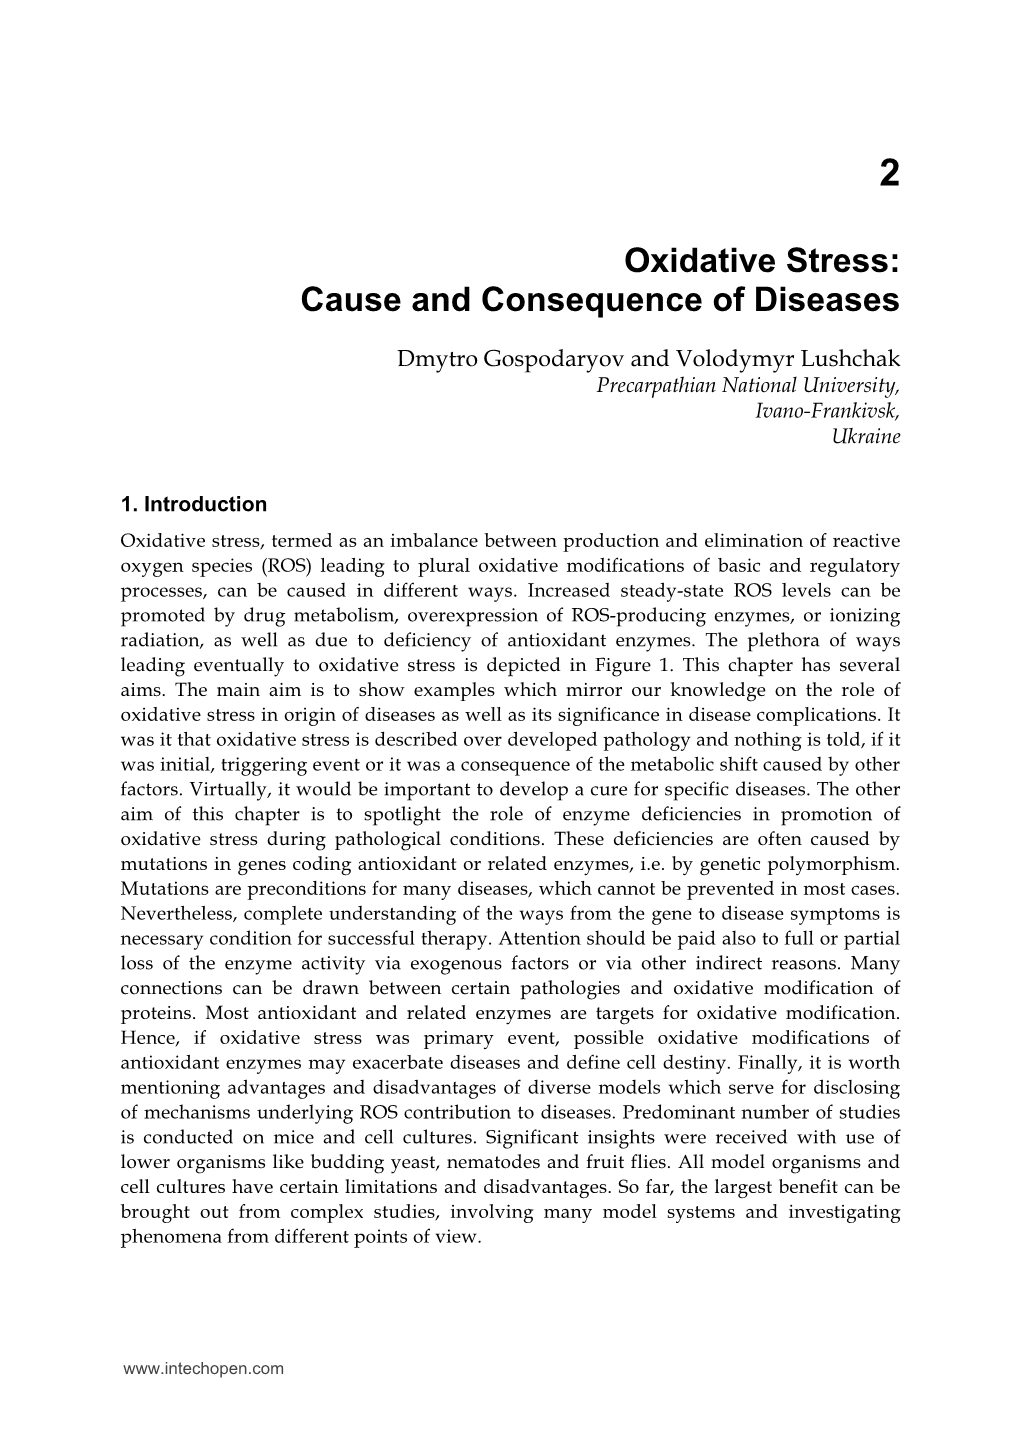 Oxidative Stress: Cause and Consequence of Diseases